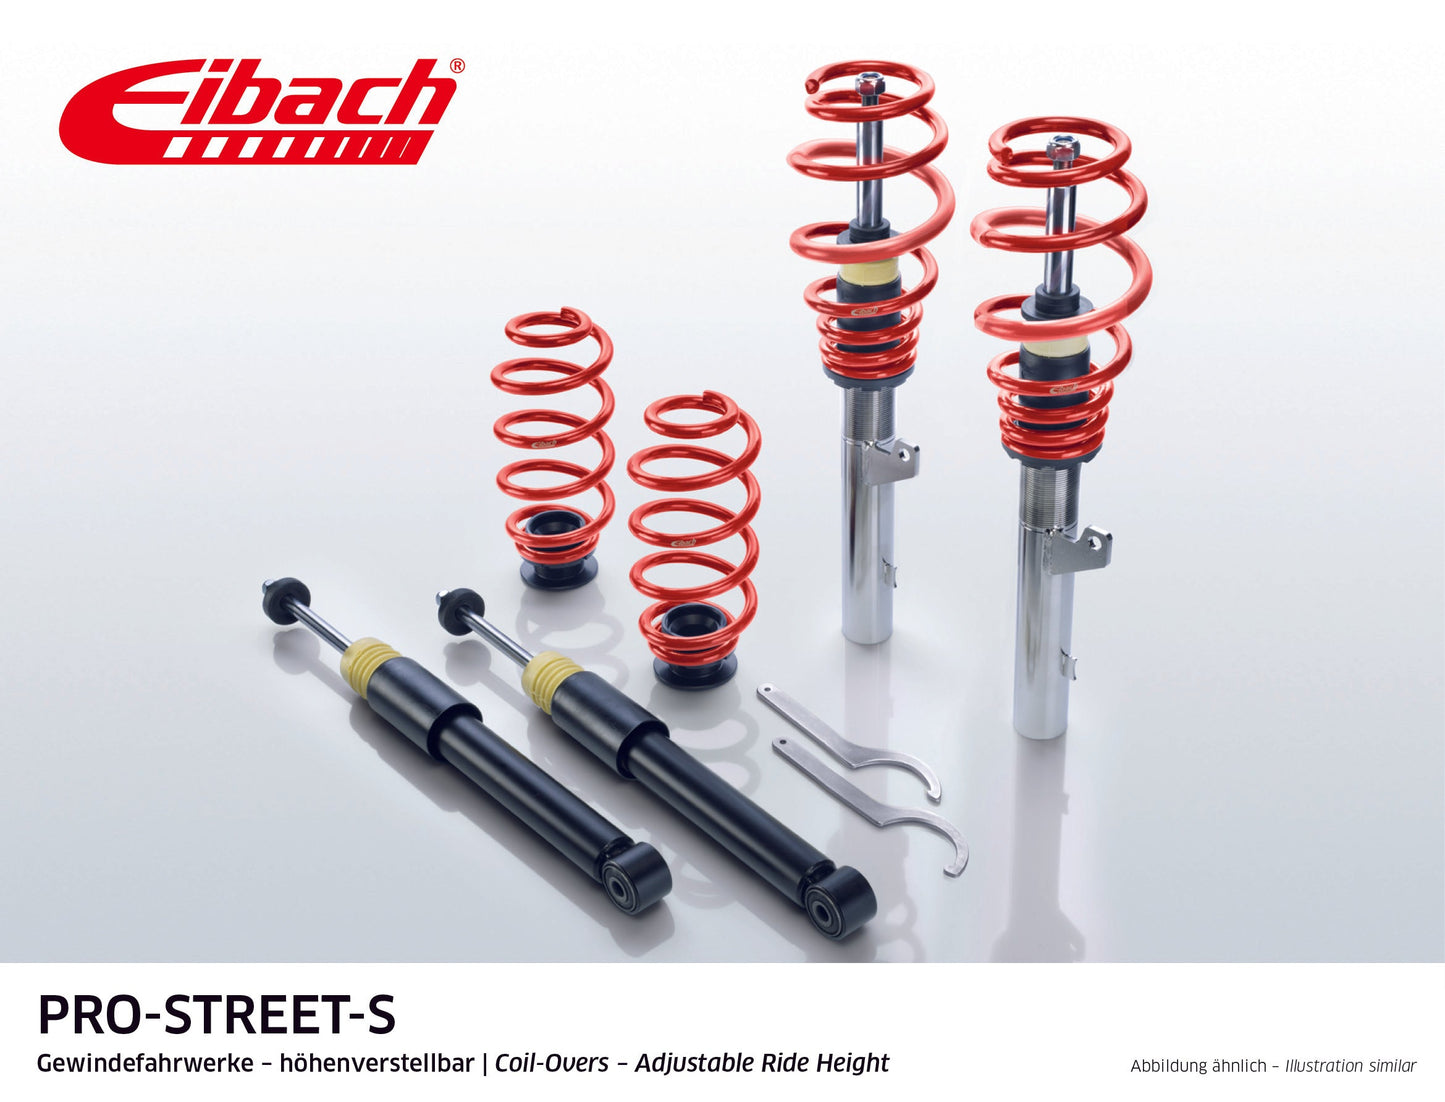 Eibach Pro-Street Coilover (PSS65-15-021-03-22) at £1177.12